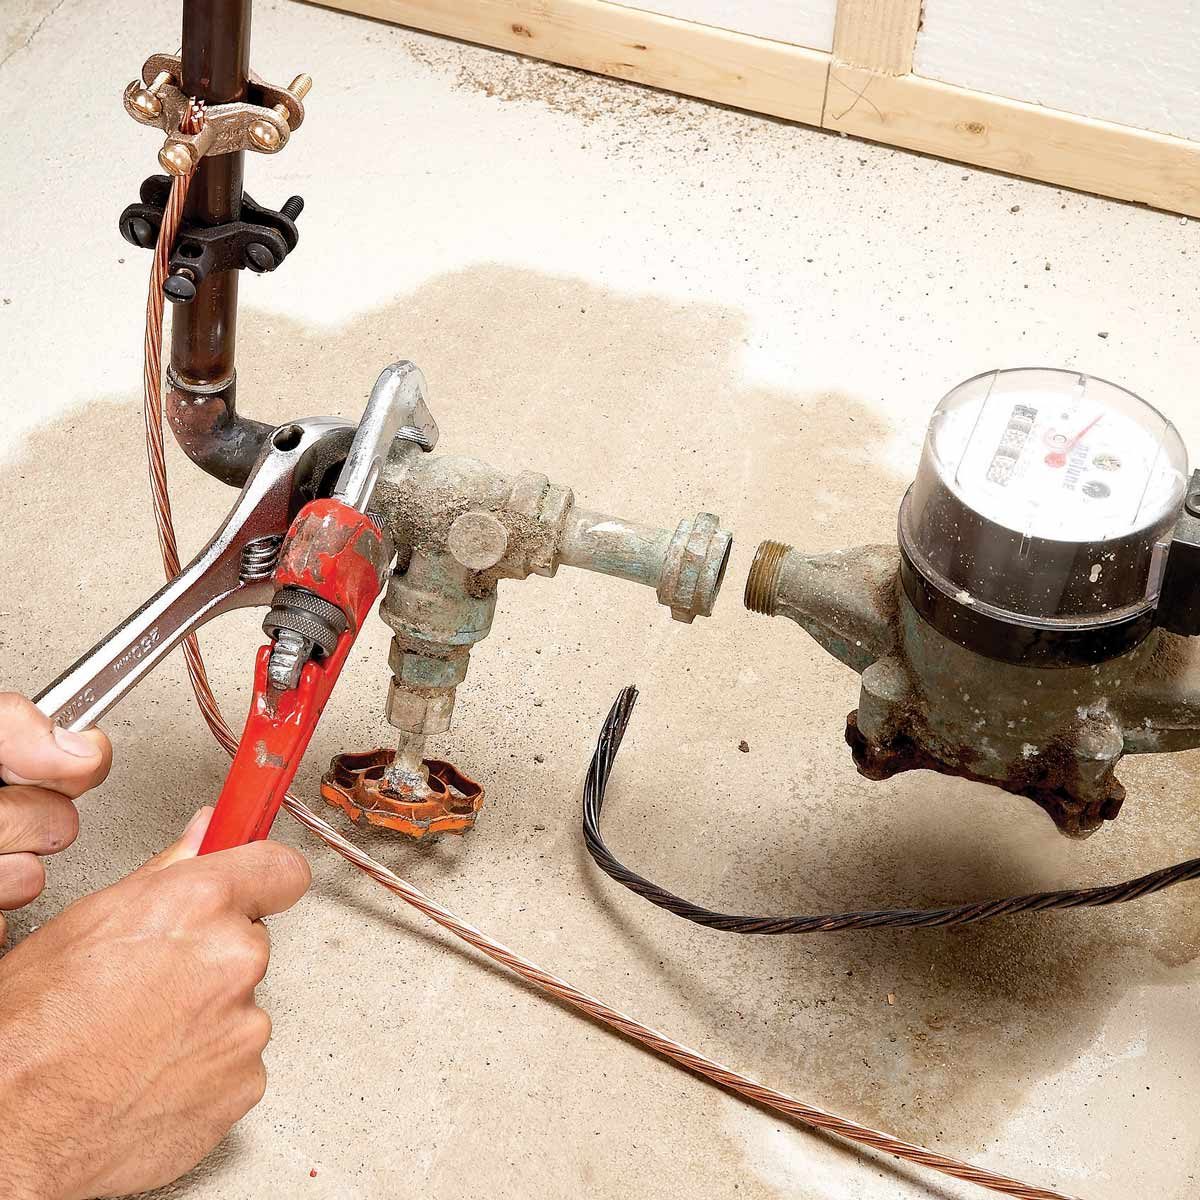 Home Repair How To Replace The Main Shut Off Valve